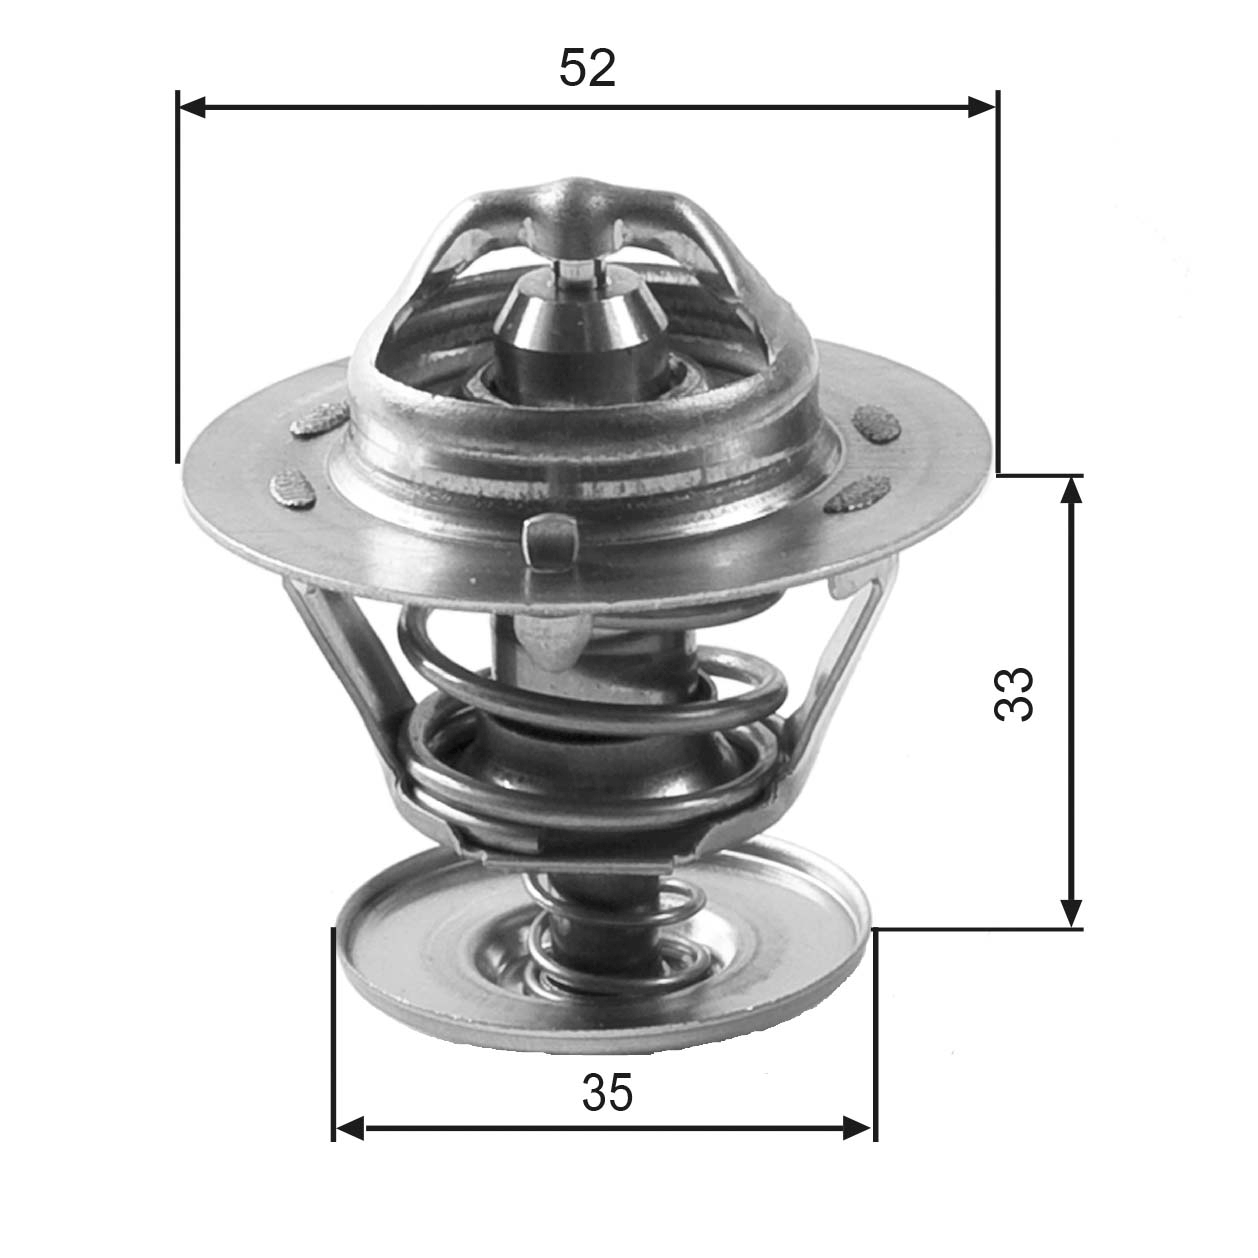 Thermostat for 1995 ford escort